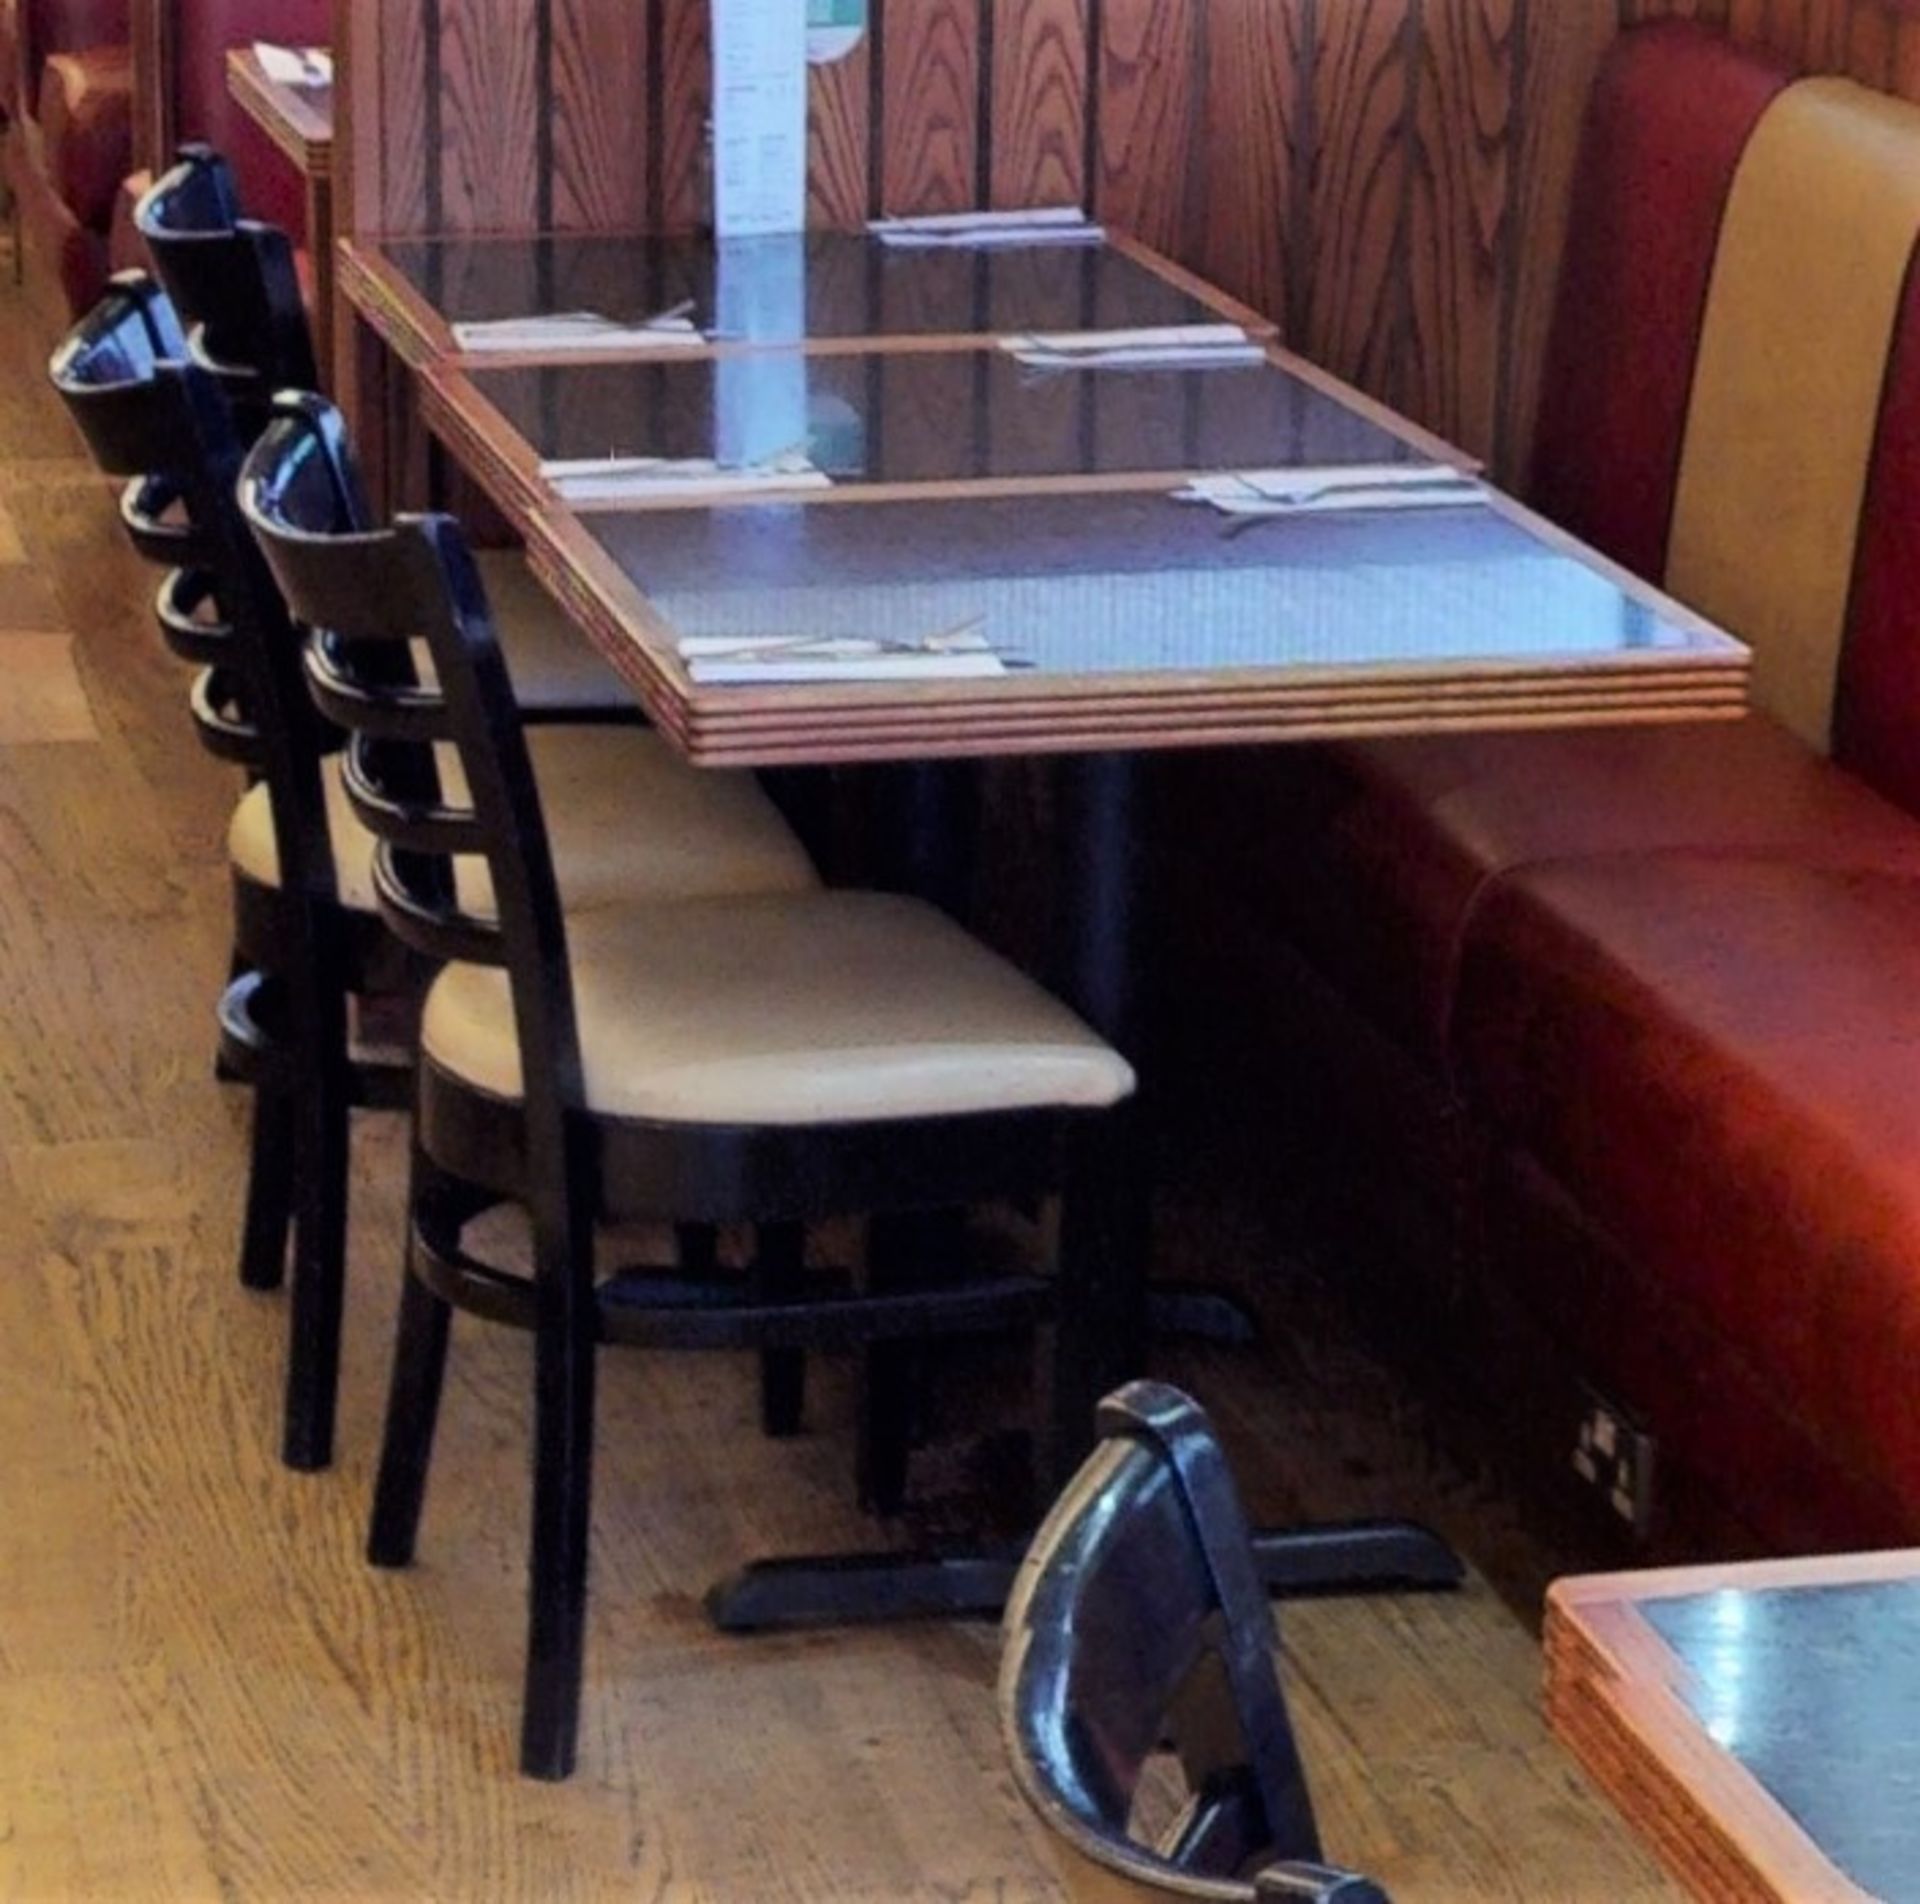 3 x Restaurant Tables With Granite Style Surface, Wooden Edging, Cast Iron Bases - Seats 2 Persons - Image 4 of 5